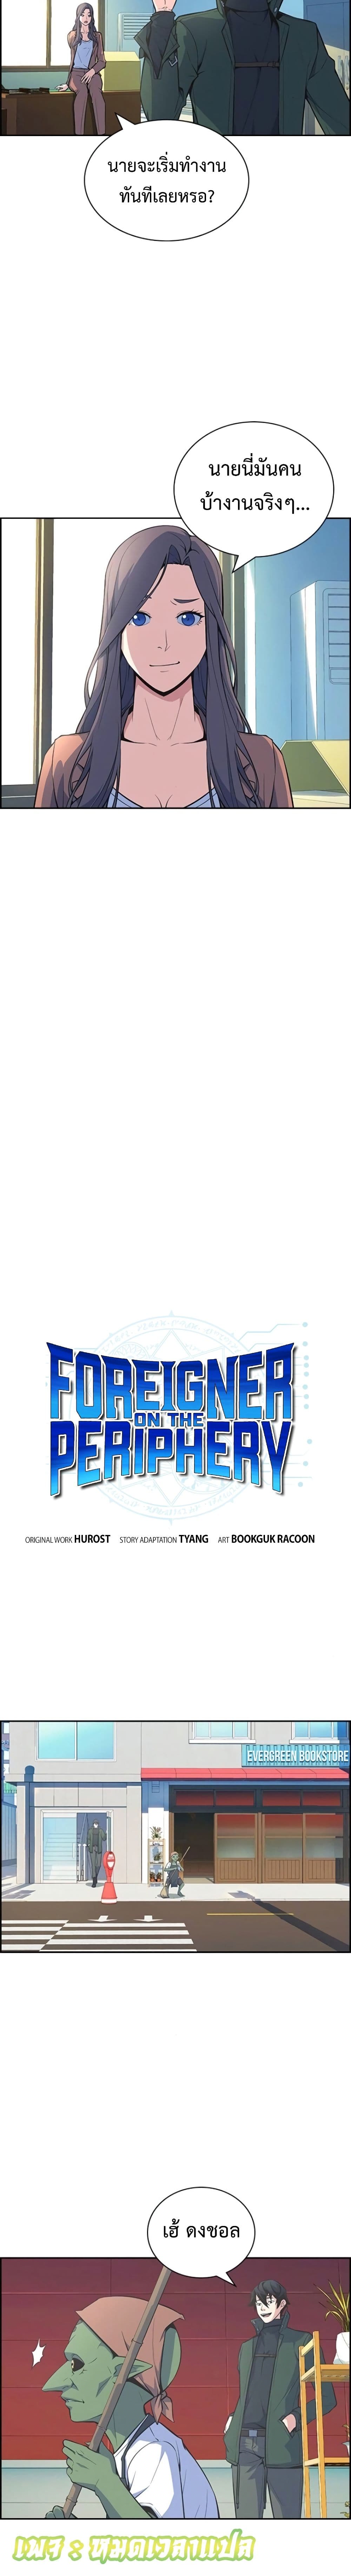 Foreigner on the Periphery 3 (8)